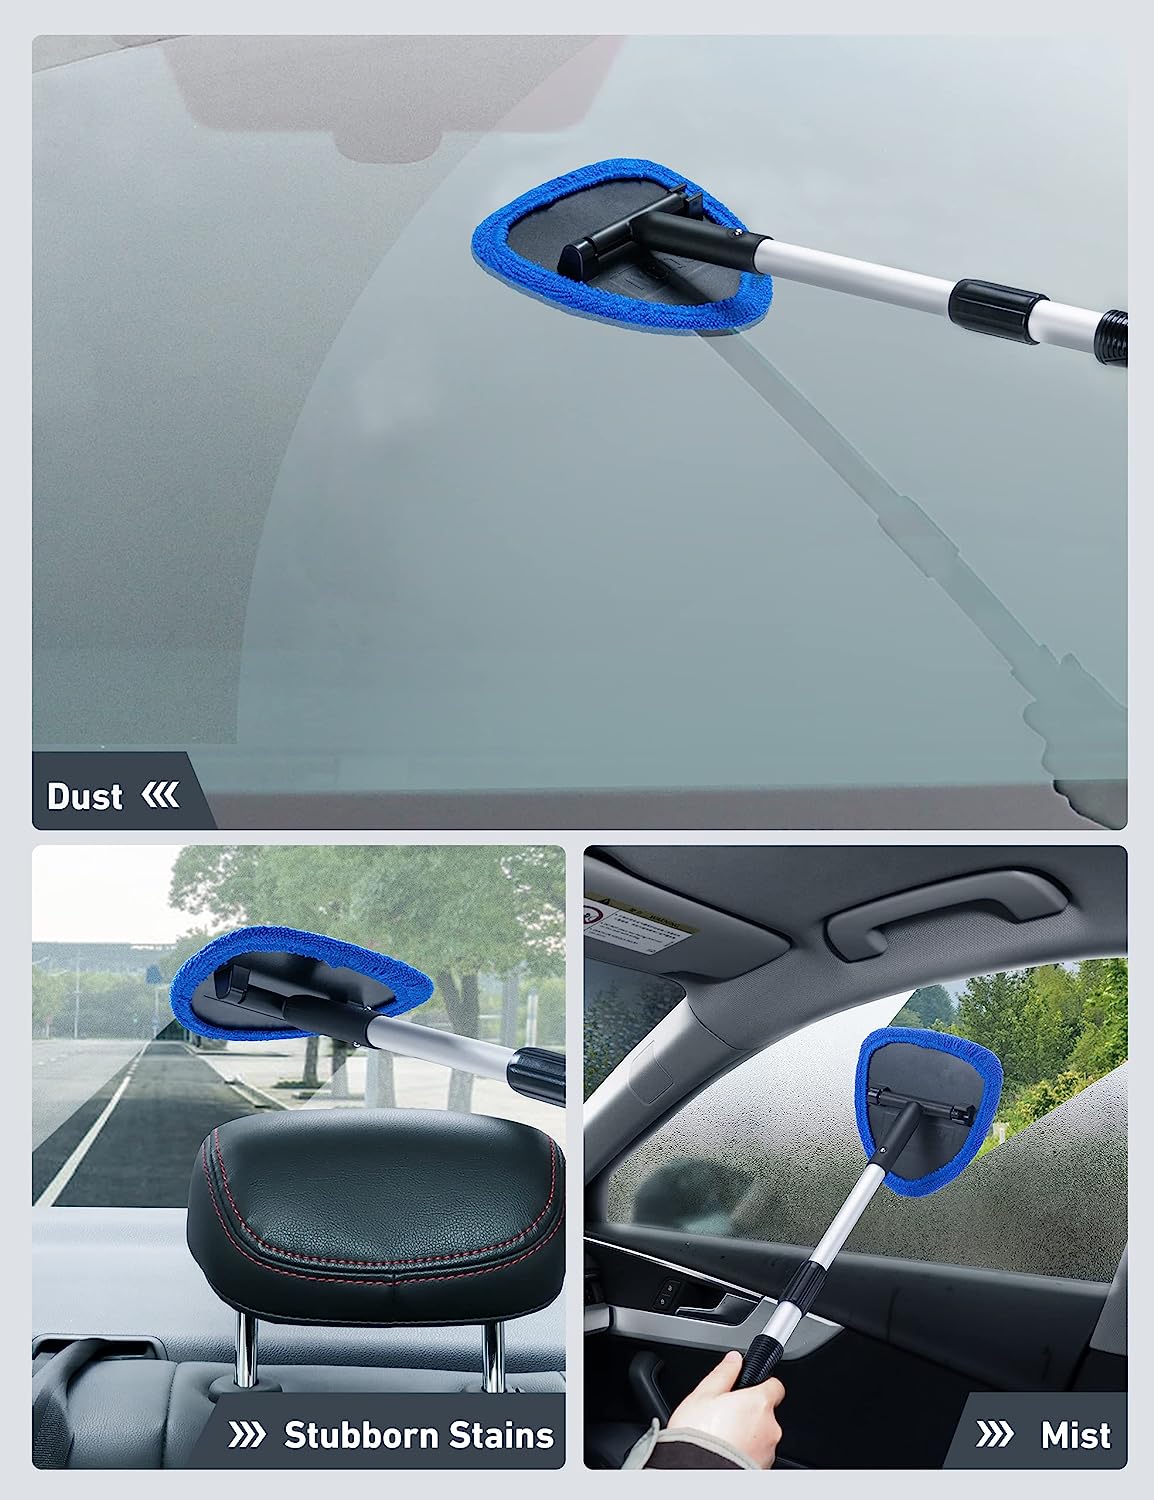 AstroAI Windshield Cleaner, Car Windshield Cleaning Tool Inside with 4 Reusable and Washable Microfiber Pads and Extendable Handle Auto Glass Wiper Kit, Blue